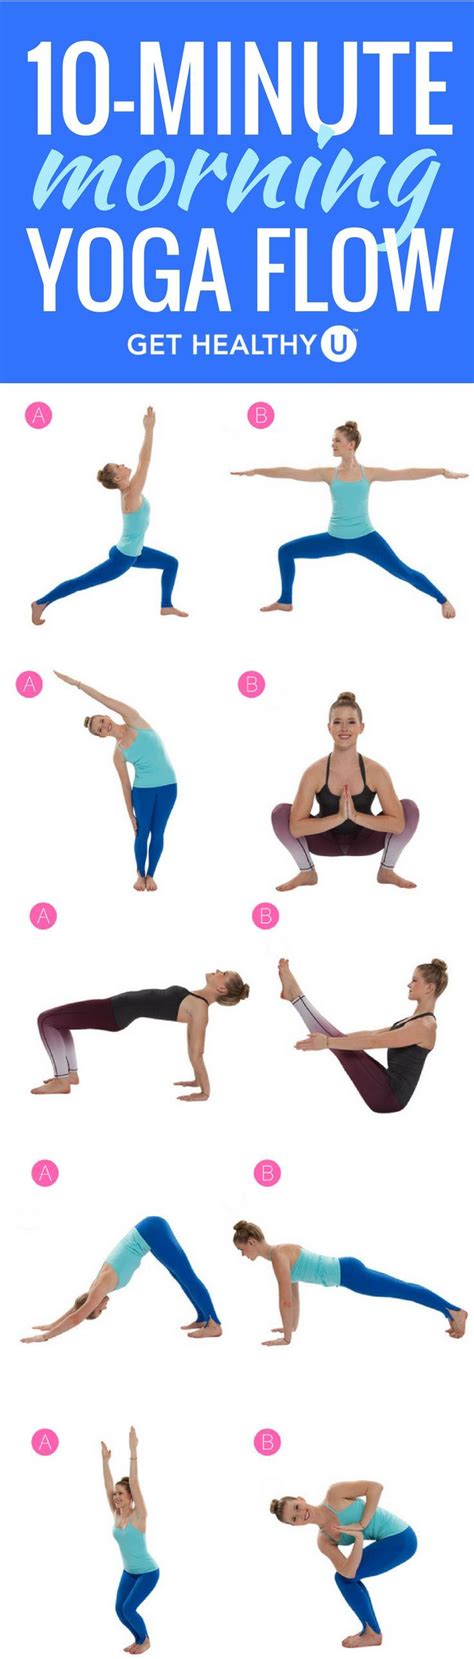 Get Energized With This 10 Minute Morning Yoga Sequence